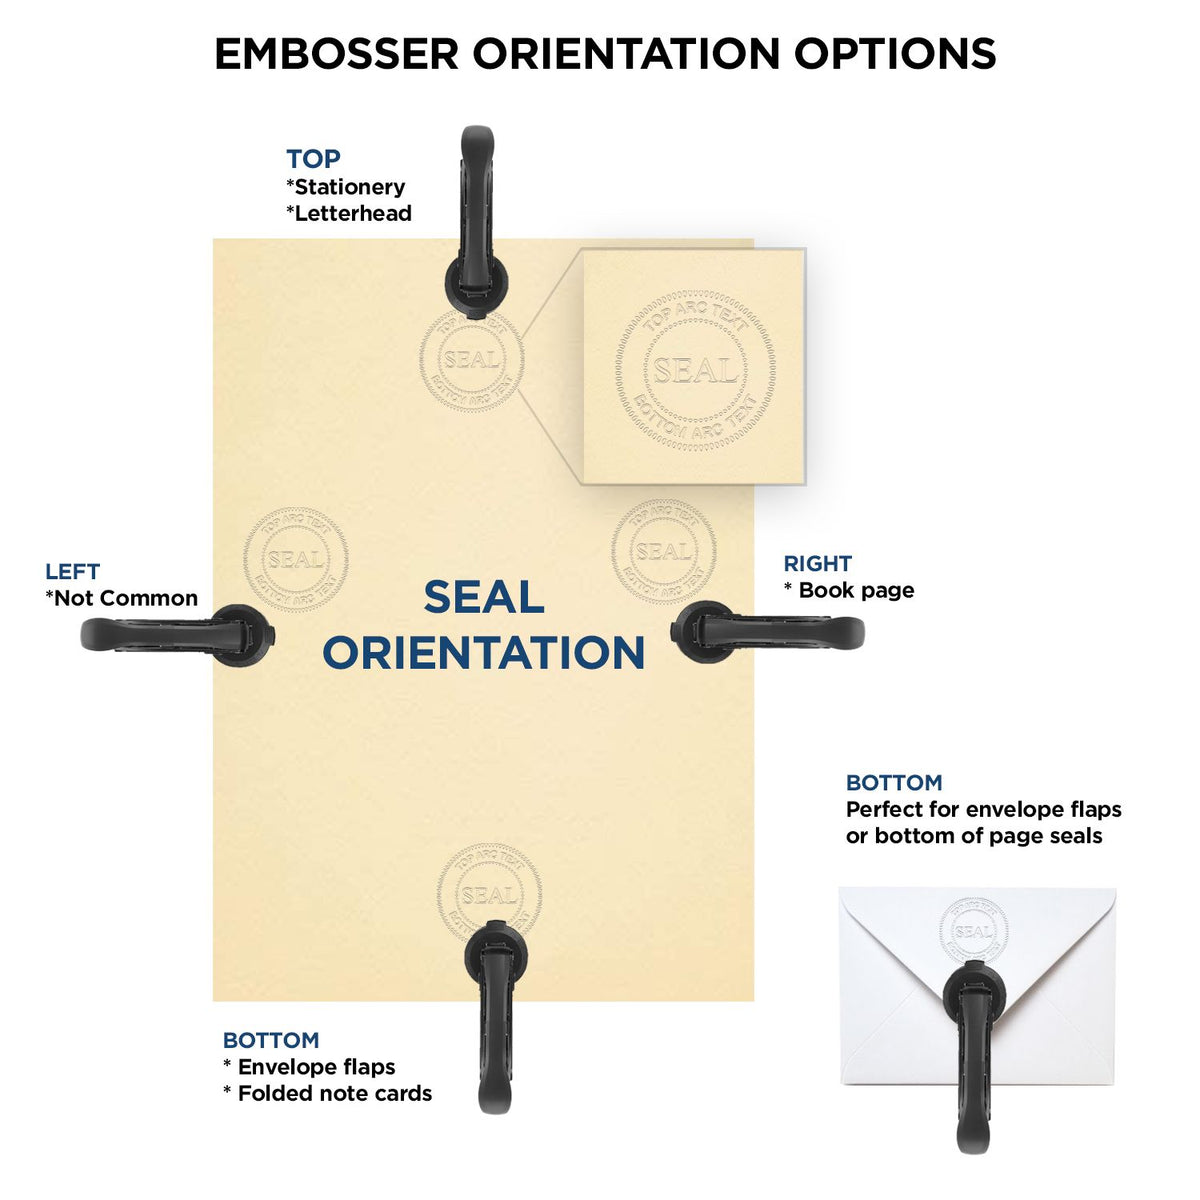 An infographic for the Gift Georgia Engineer Seal showing embosser orientation, this is showing examples of a top, bottom, right and left insert.